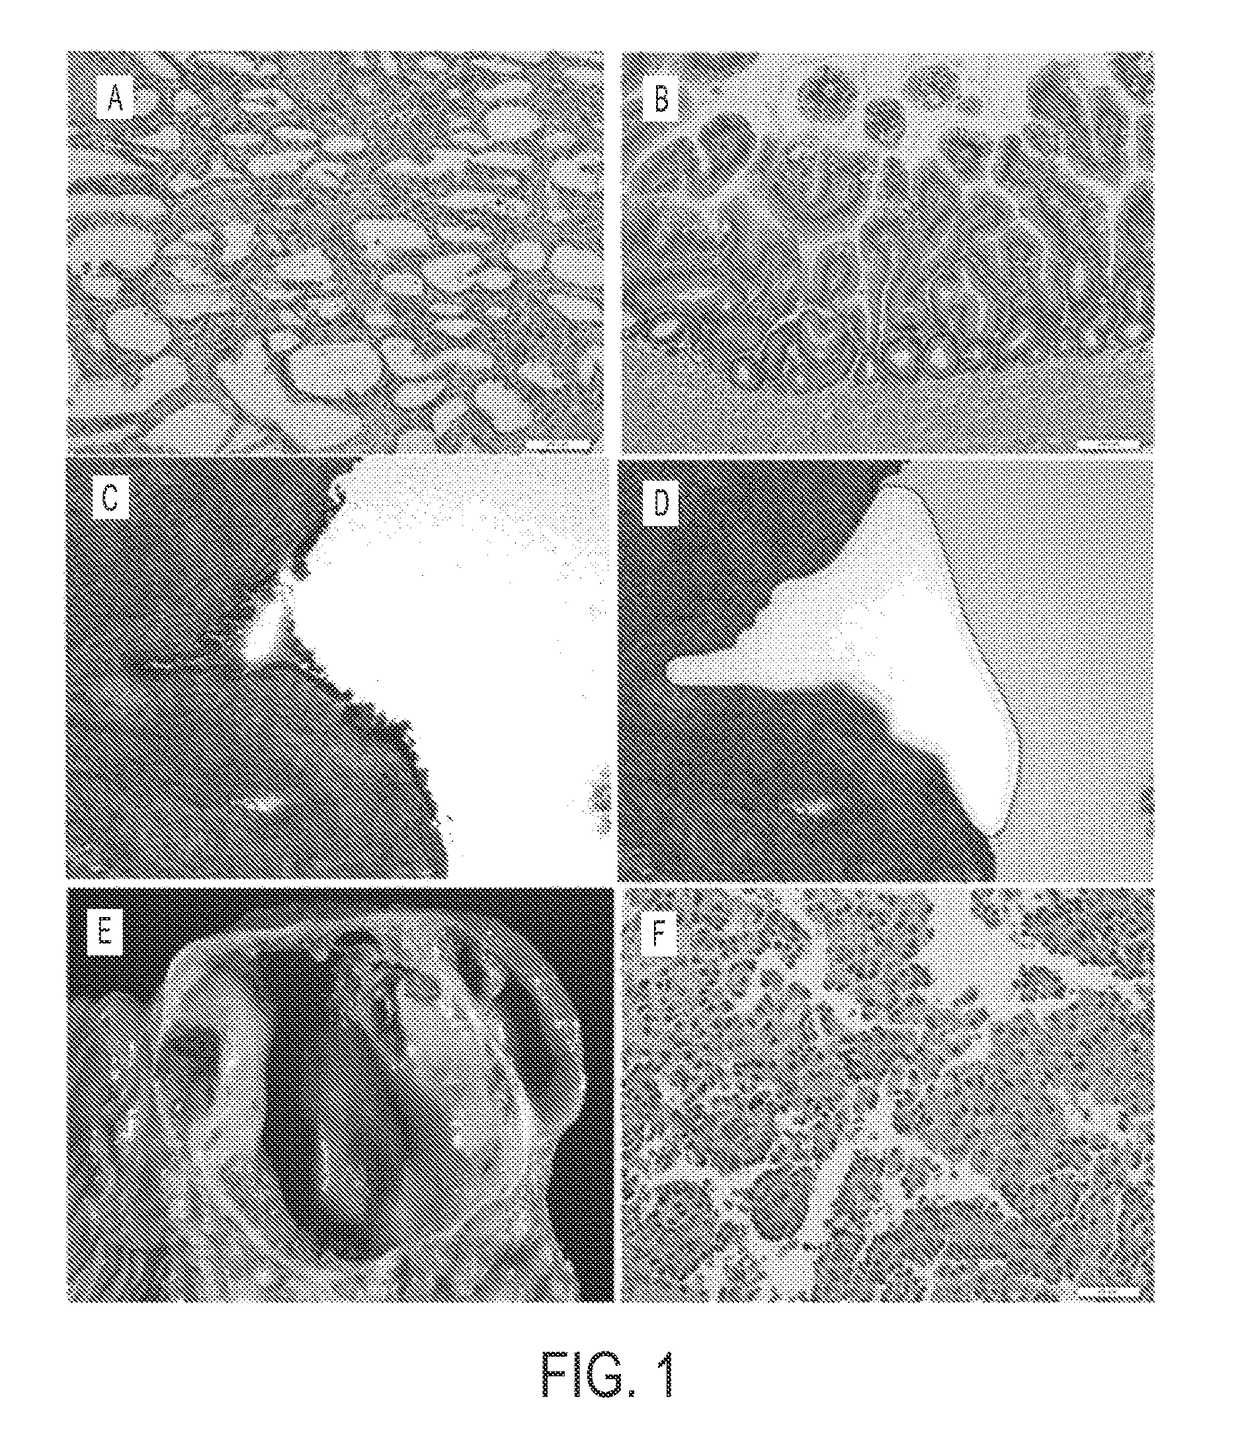 Differential identification of pancreatic cysts